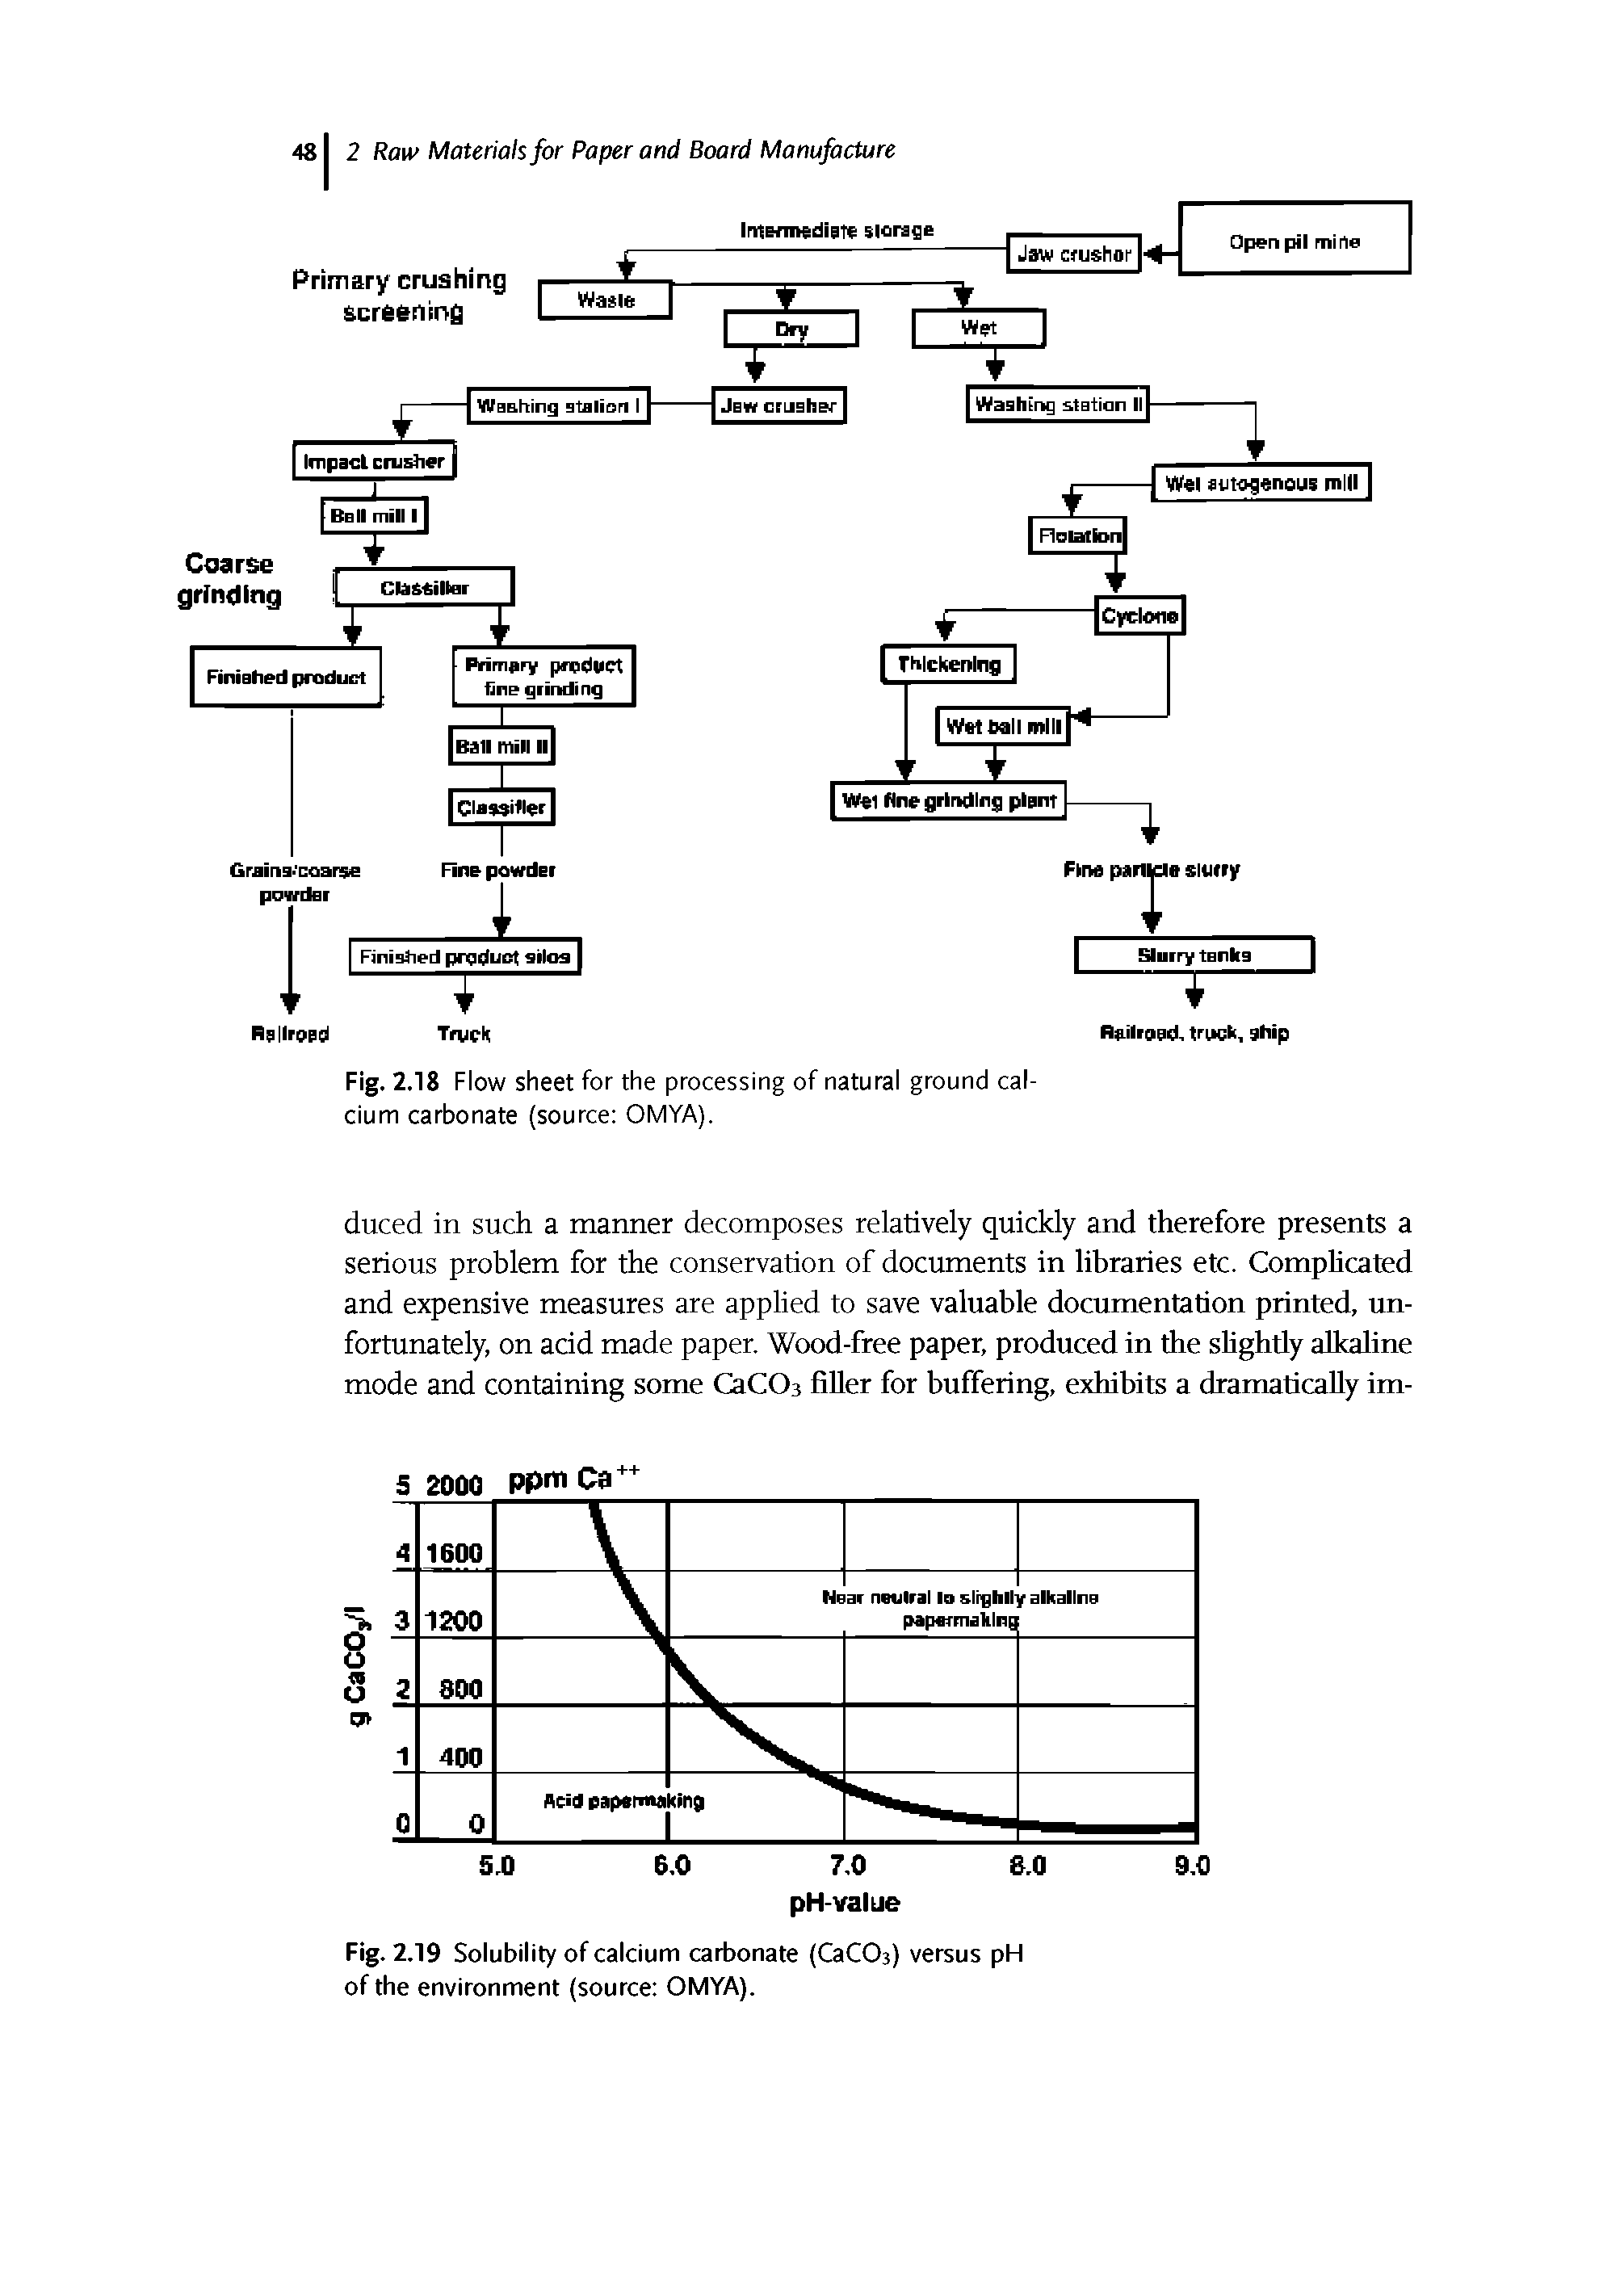 Fig. 2.18 Flow sheet for the processing of natural ground calcium carbonate (source OMYA).